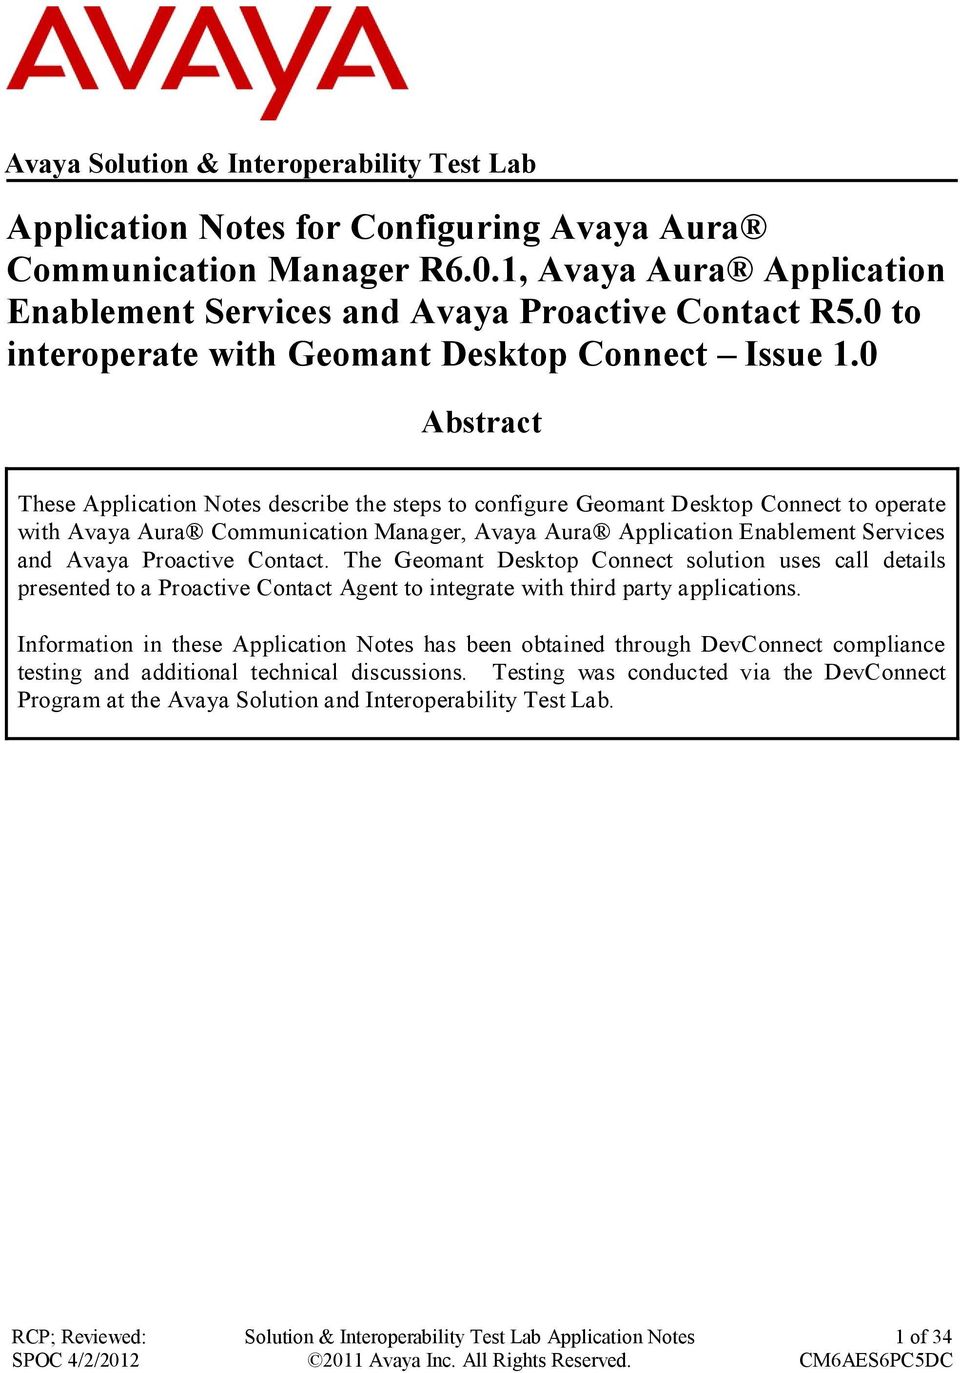 0 Abstract These Application Notes describe the steps to configure Geomant Desktop Connect to operate with Avaya Aura Communication Manager, Avaya Aura Application Enablement Services and Avaya